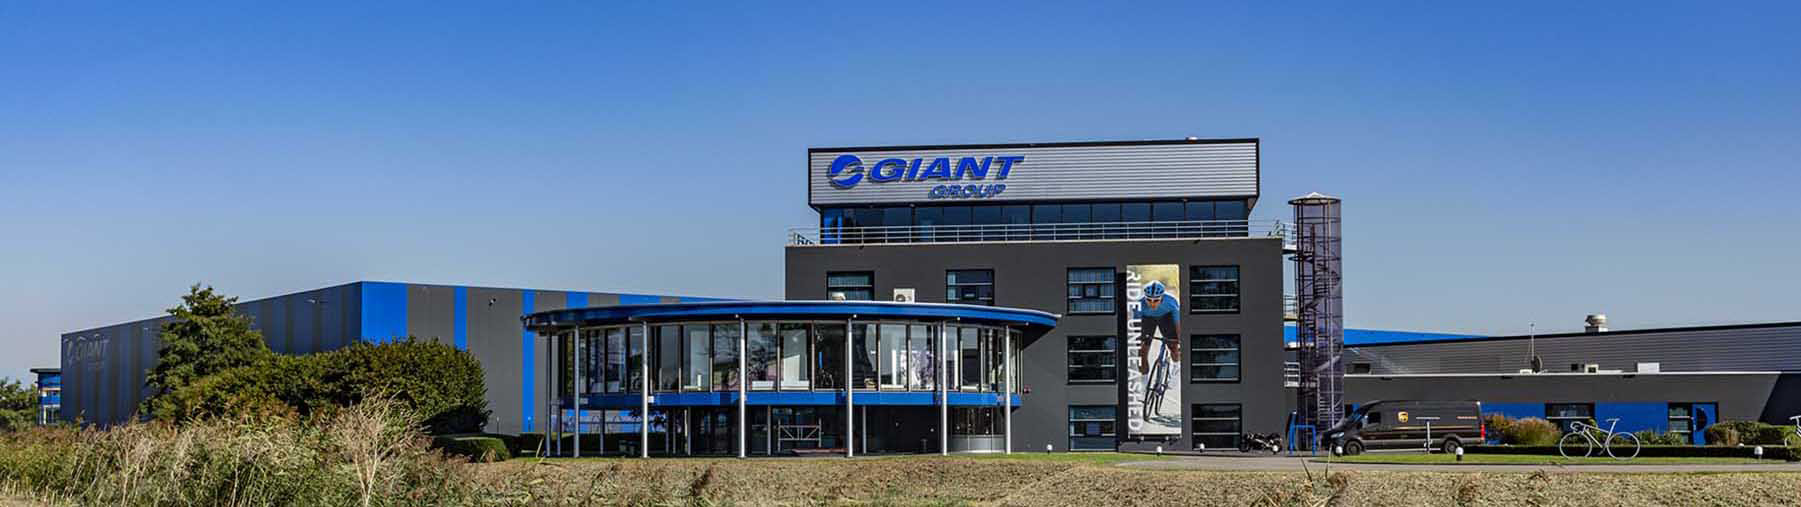 Giant Bicycles Europe